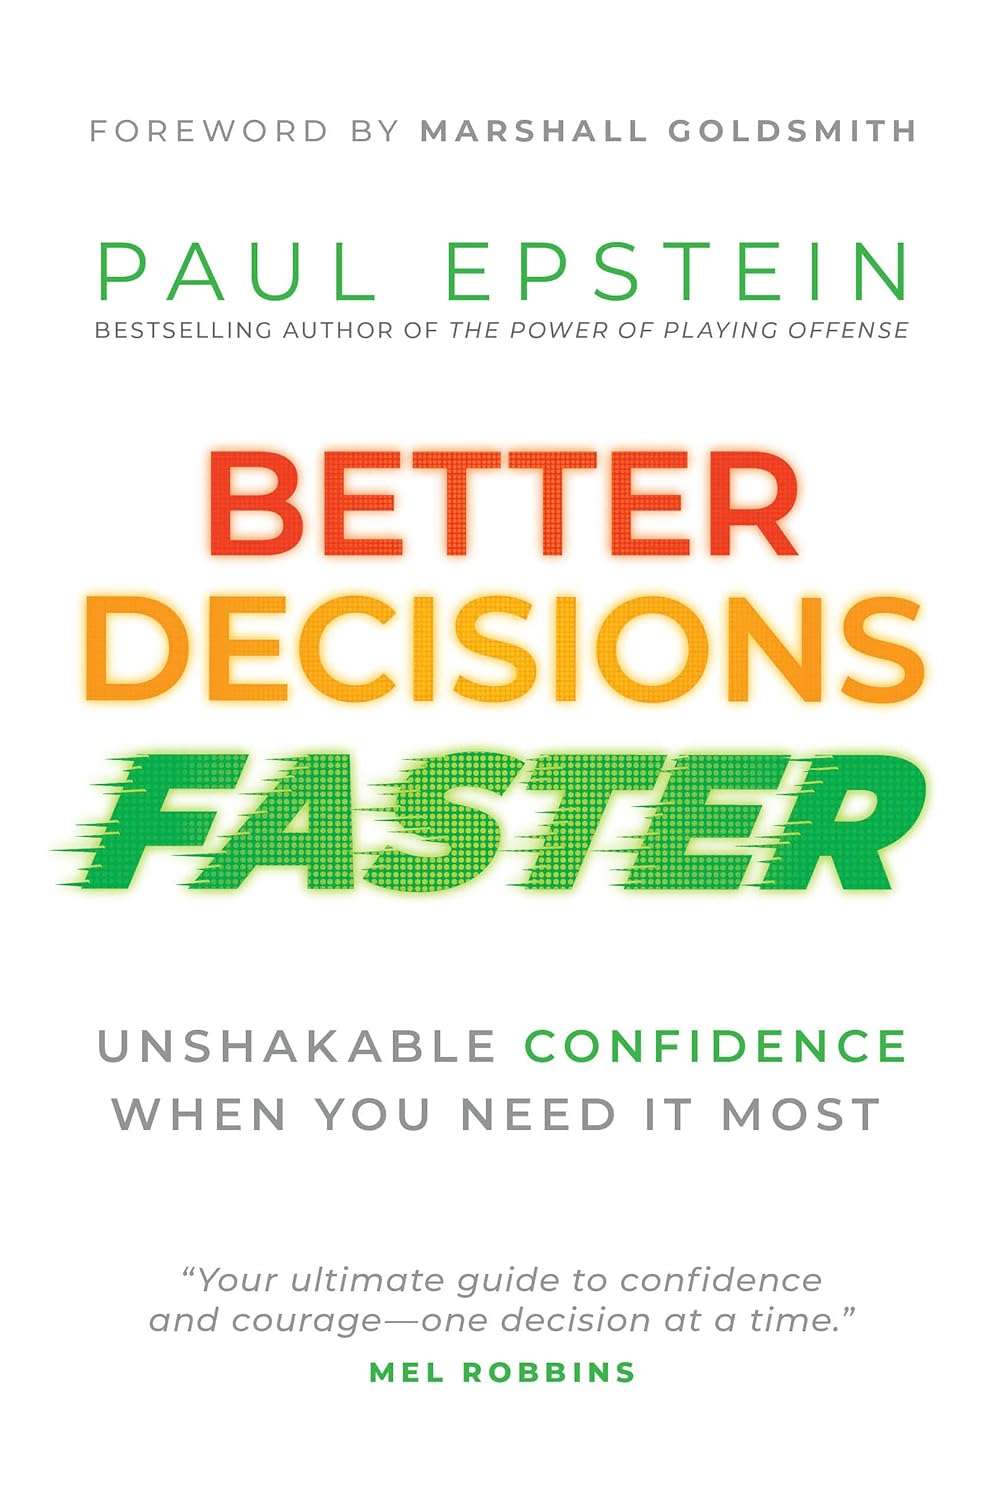 Better decisions faster by paul epstein.